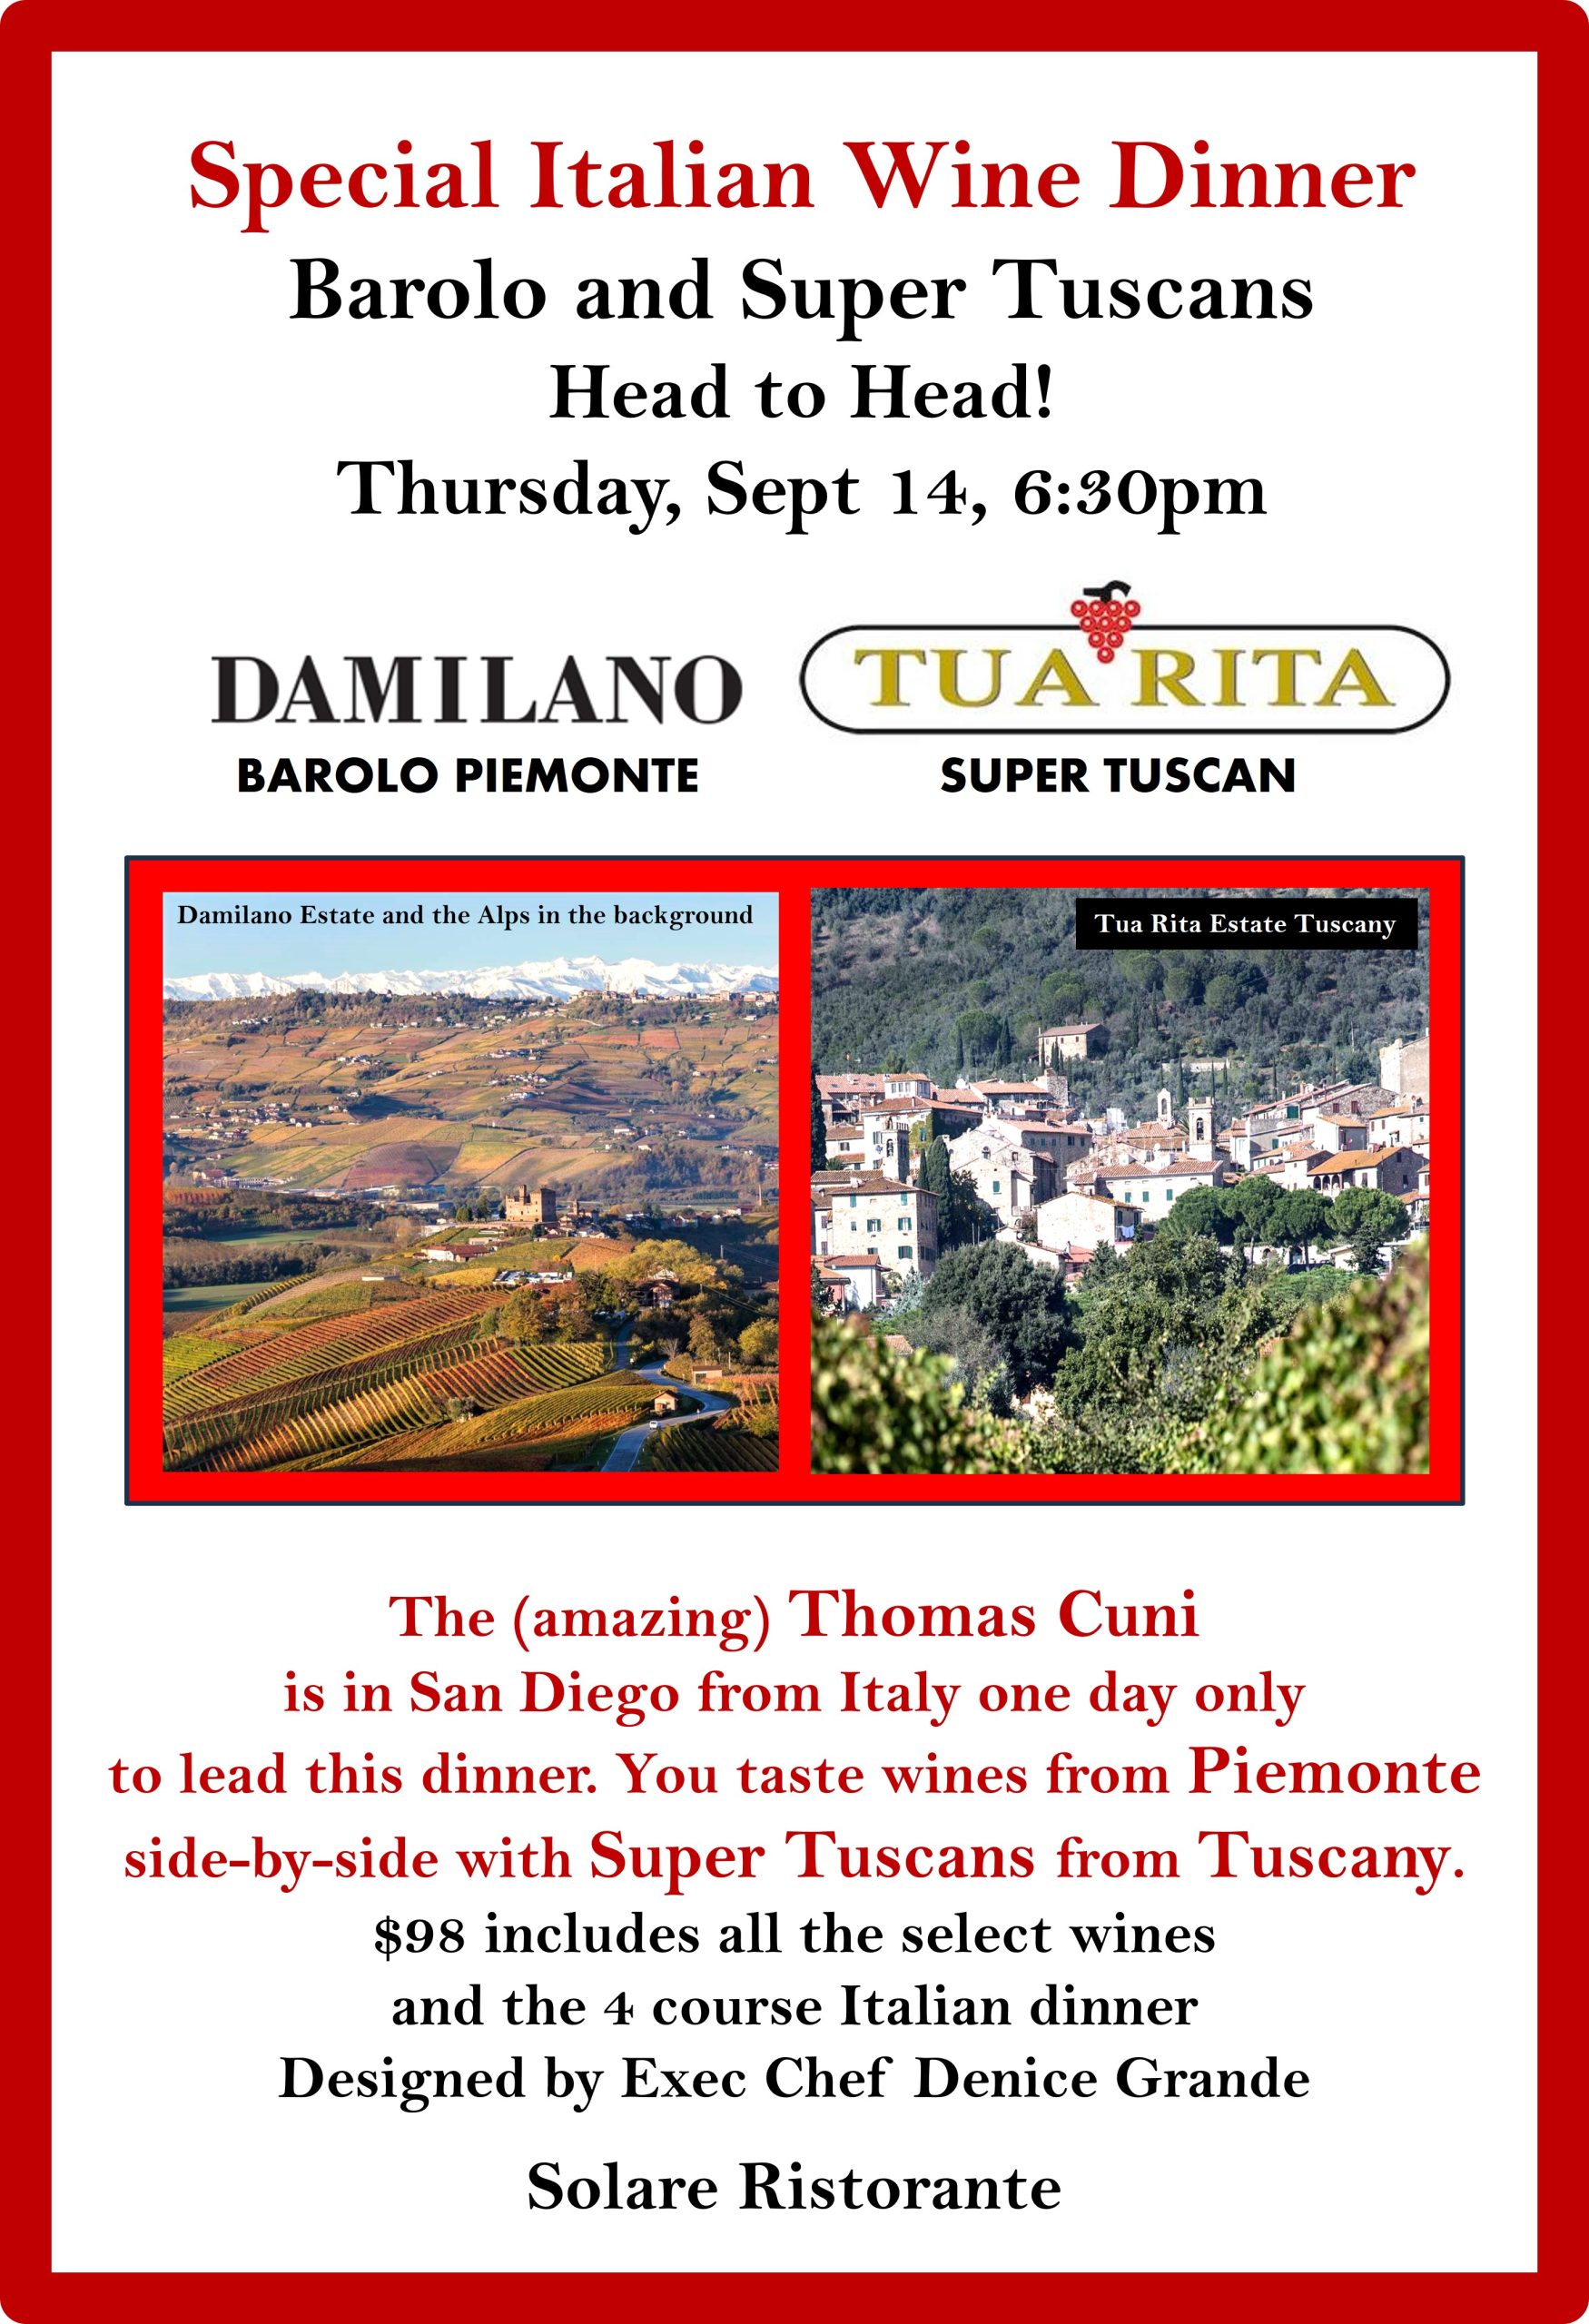 <a id="Solare-Barolo-and-SuperTuscan-Wine-Dinner"></a>Italian Wine Dinner ~ Barolo and Super Tuscans!